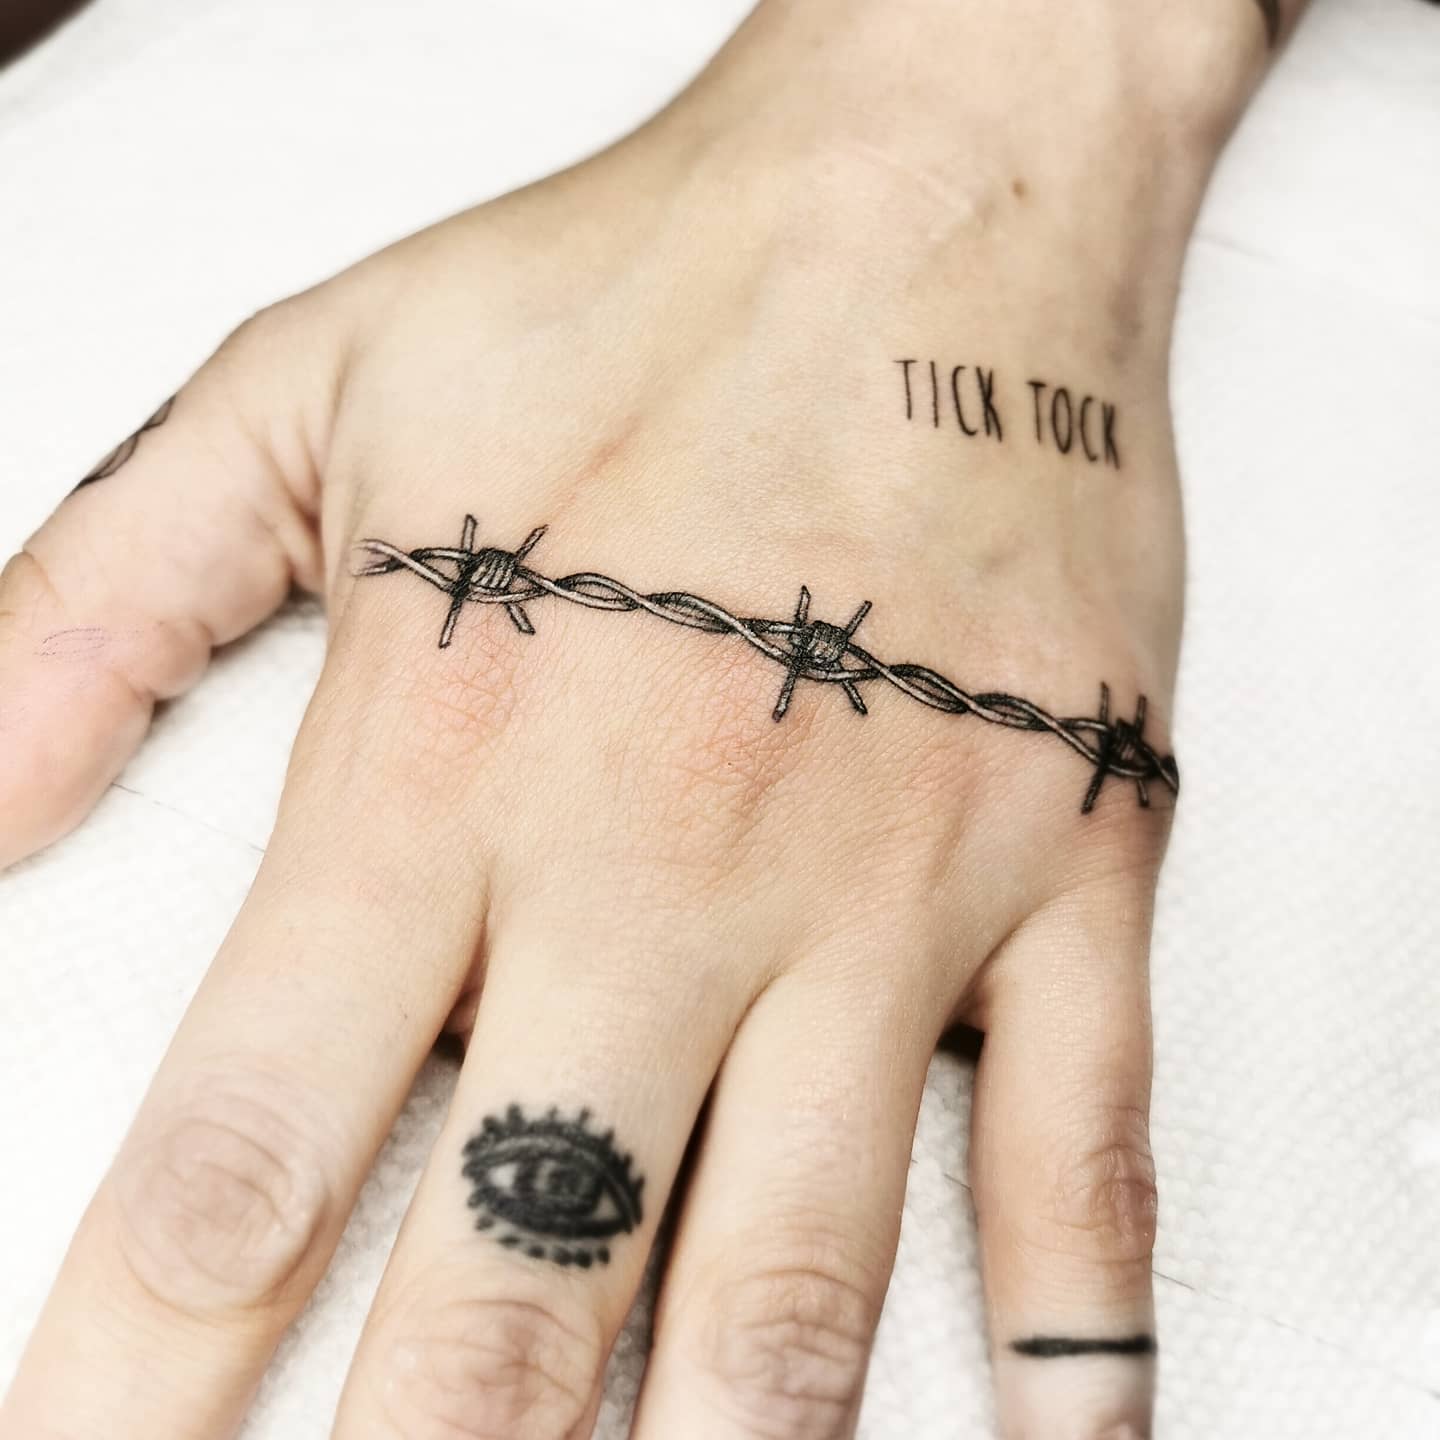 The Insane And Frightening Meanings Of Prison Tattoos